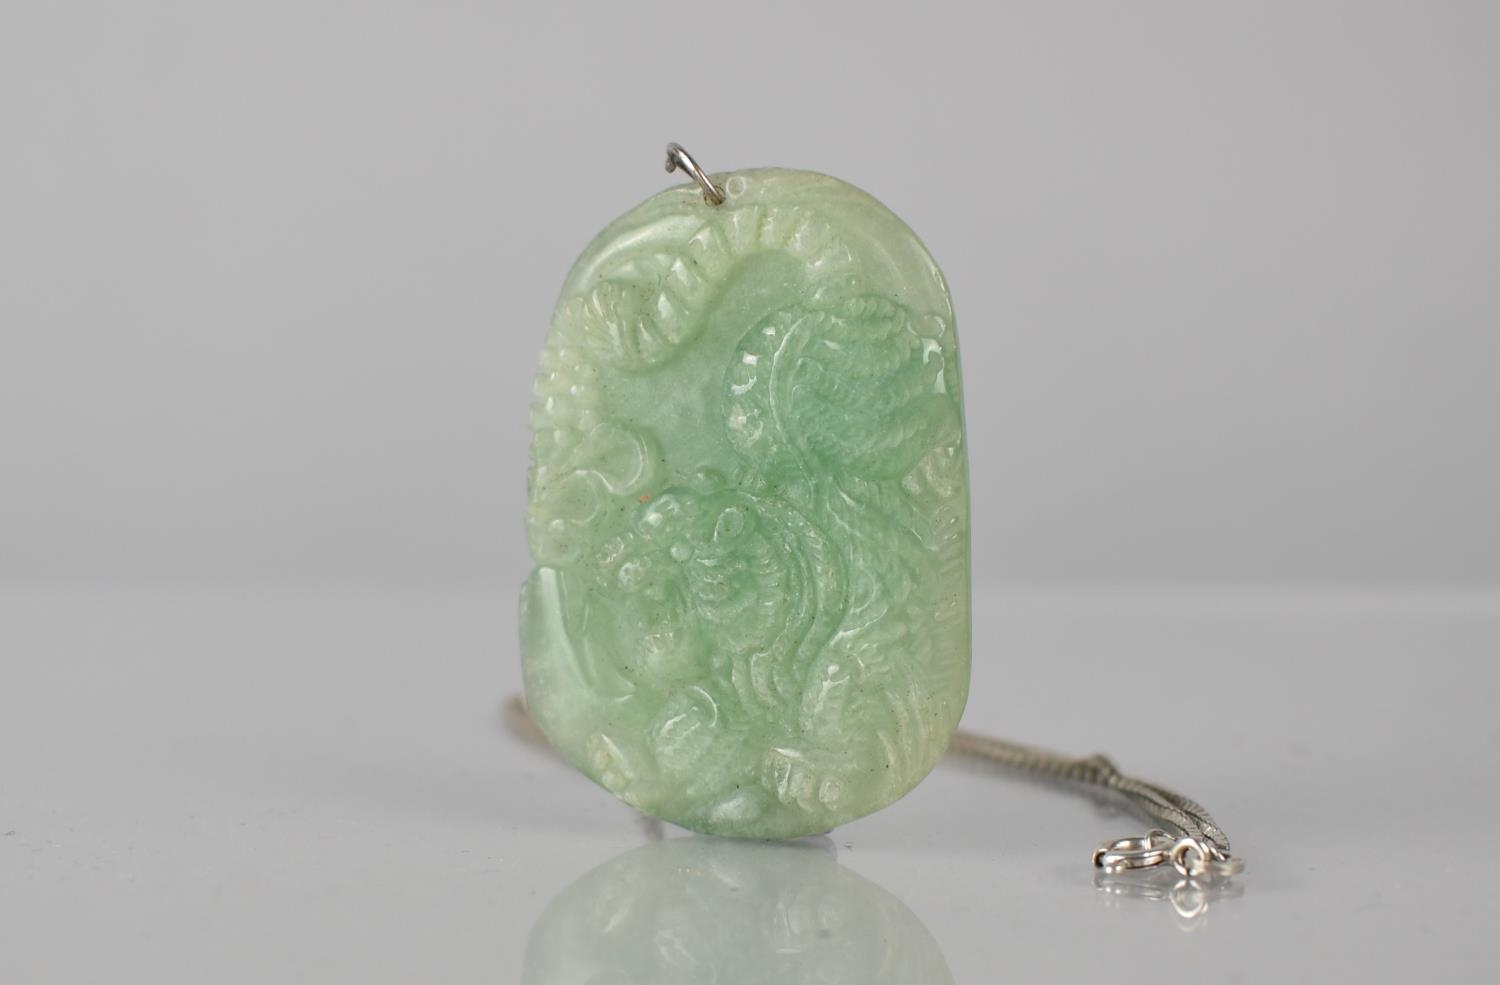 A Jade Pendant on Silver Chain, Panel Depicting Pouncing Tiger in Relief amongst Flowers and Foliage - Image 2 of 3